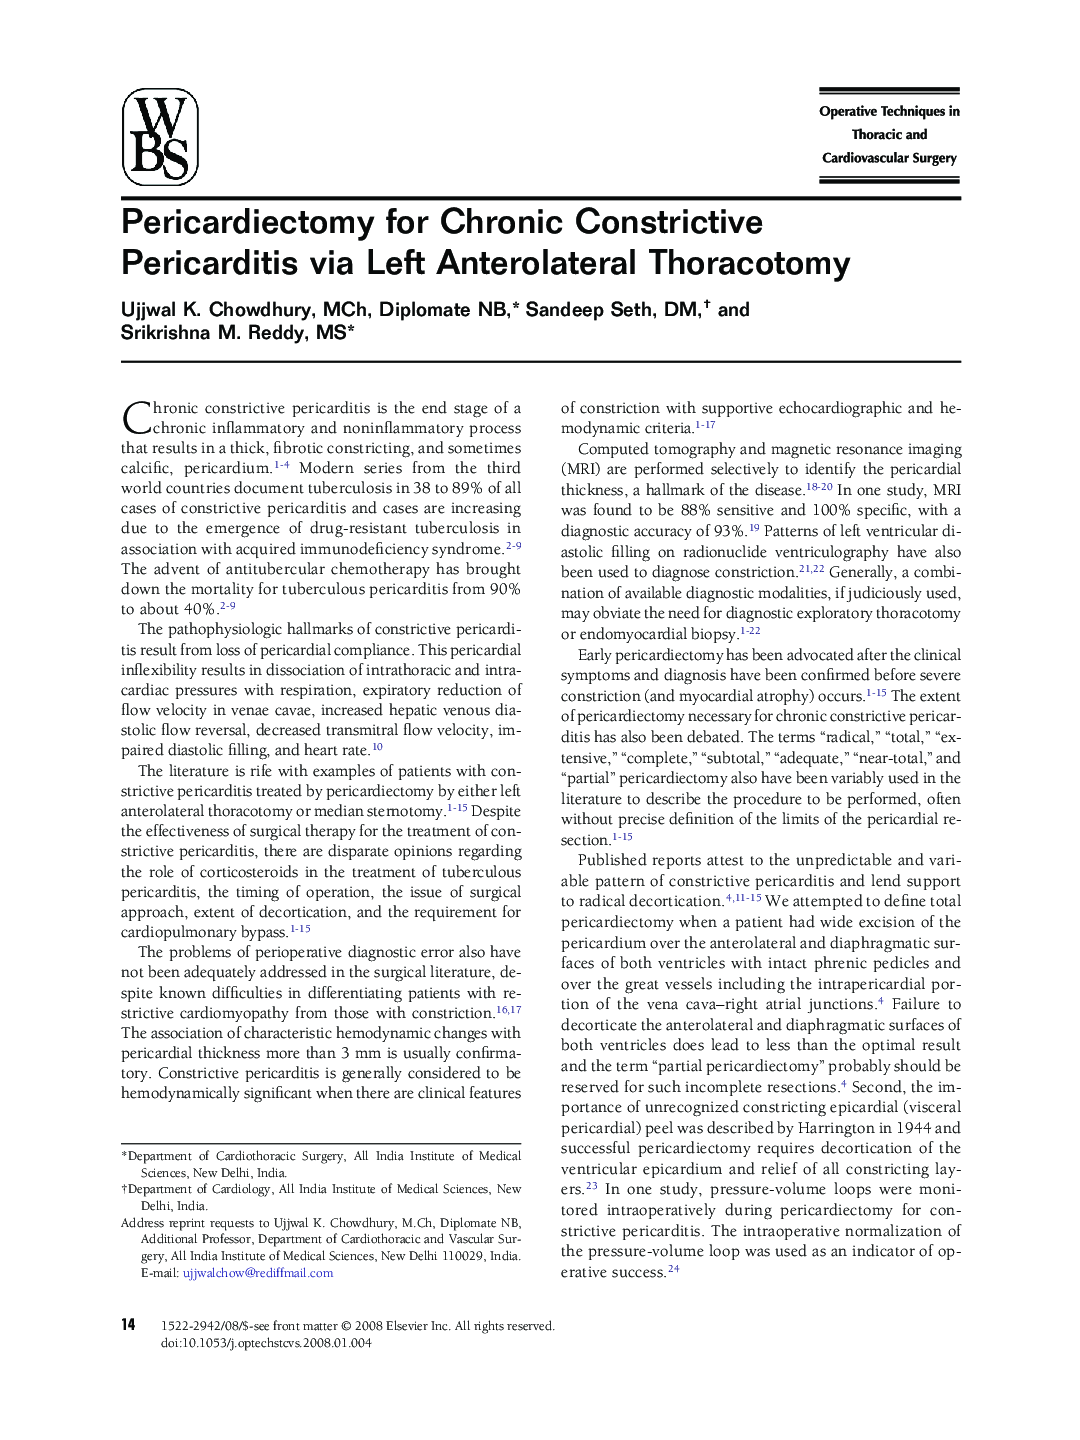 Pericardiectomy for Chronic Constrictive Pericarditis via Left Anterolateral Thoracotomy